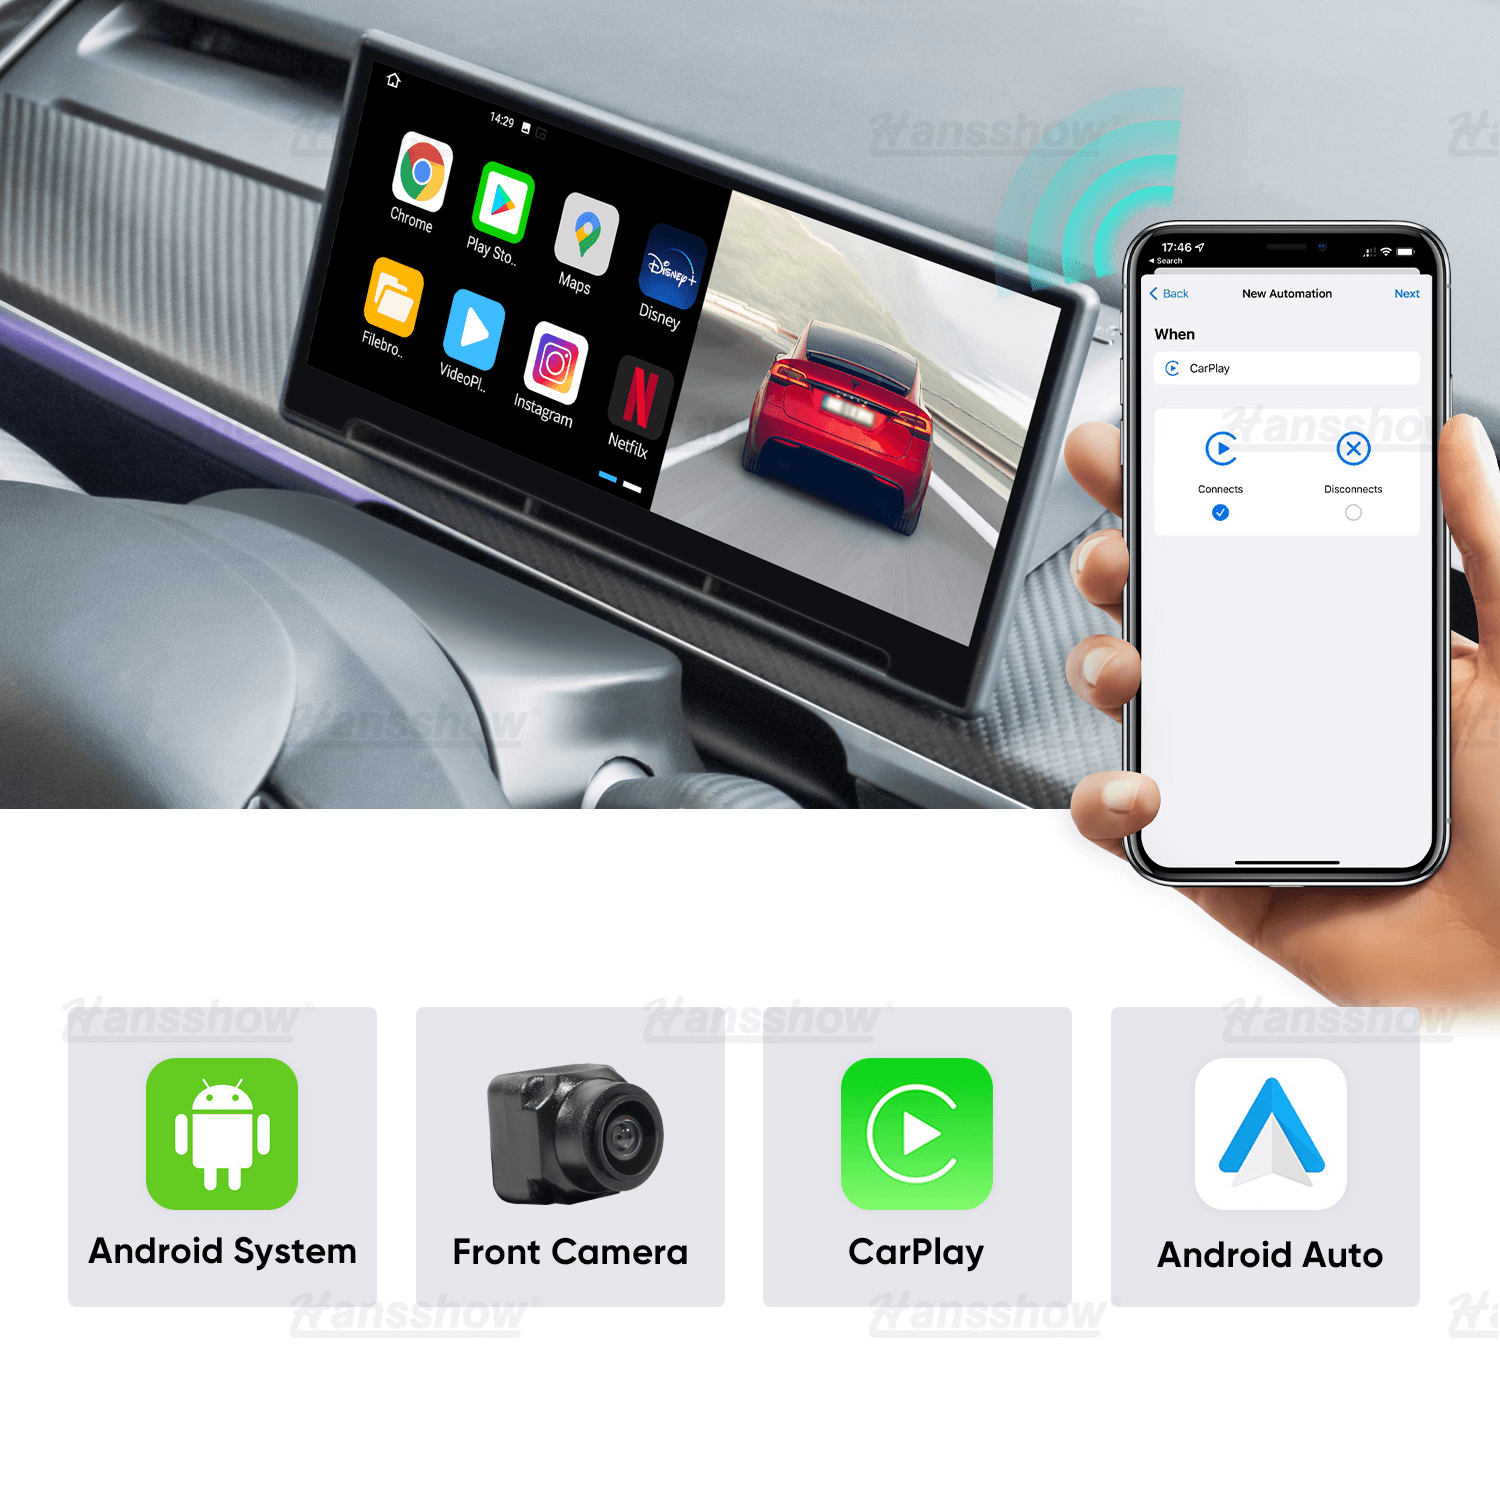 Hansshow Modell 3/Y F9 9 Zoll Touchscreen Carplay/Android Auto Smart Dashboard